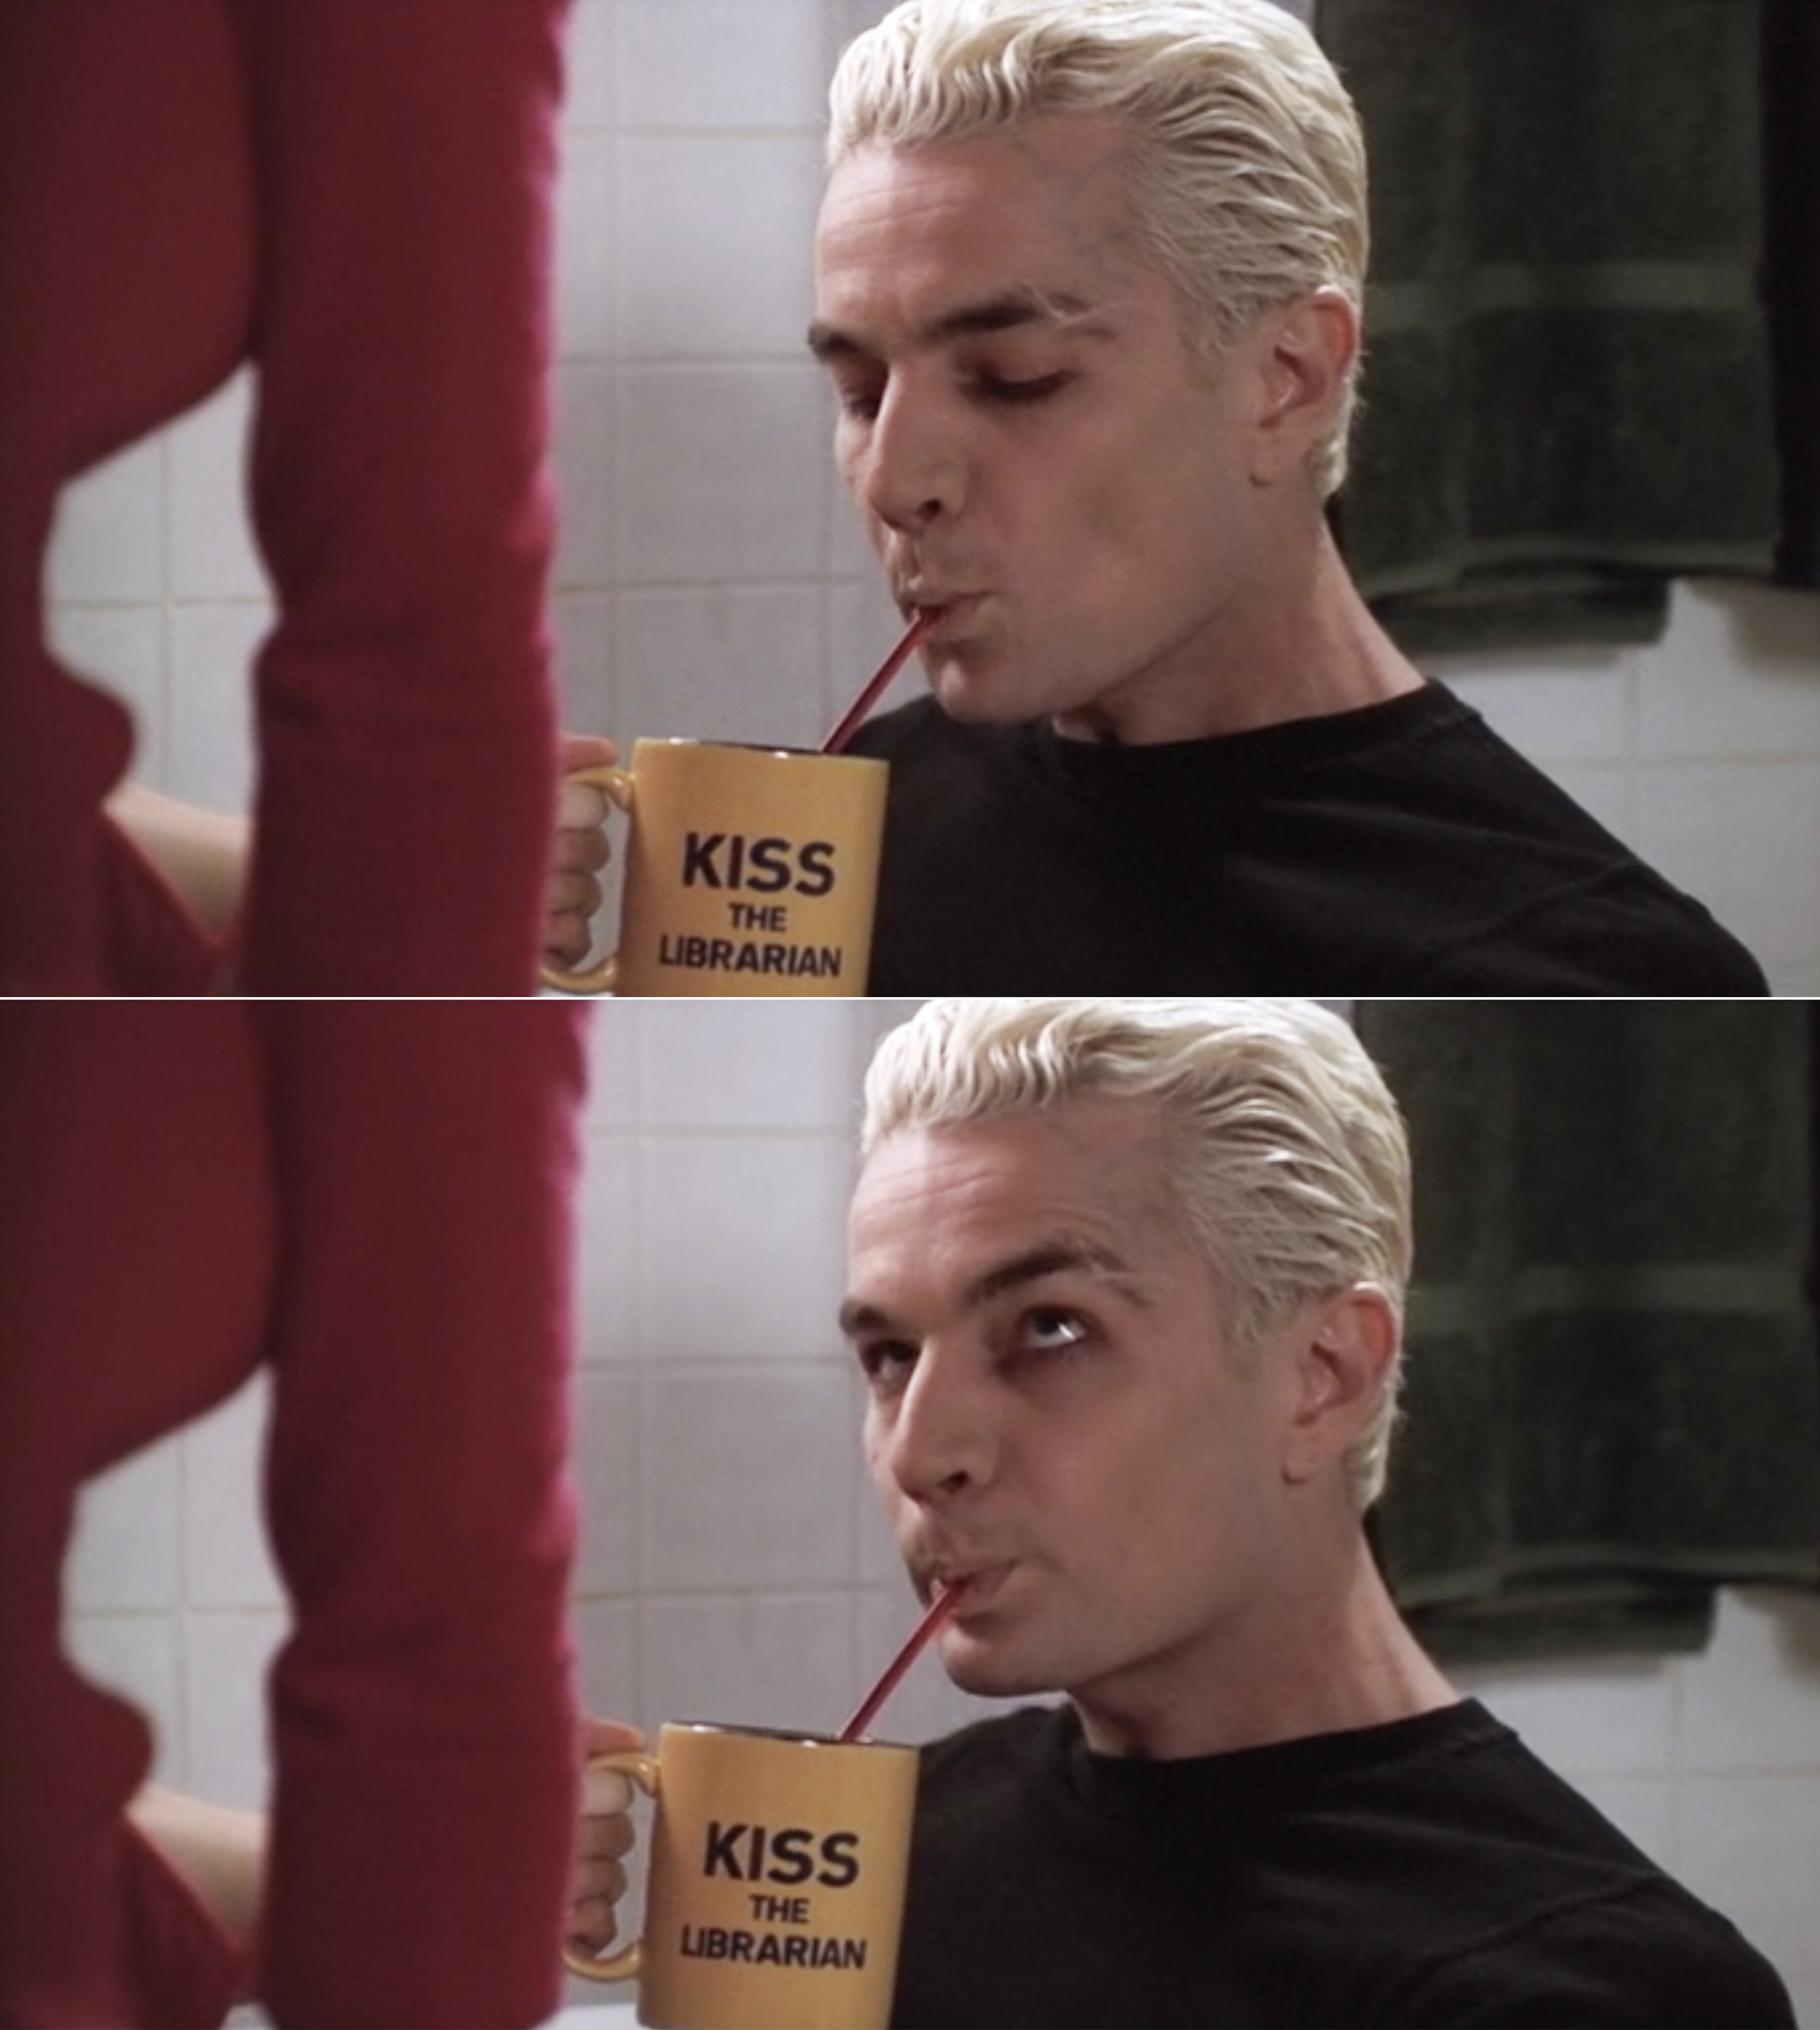 Spike drinking blood through a straw and out of a &quot;kiss the librarian&quot; mug